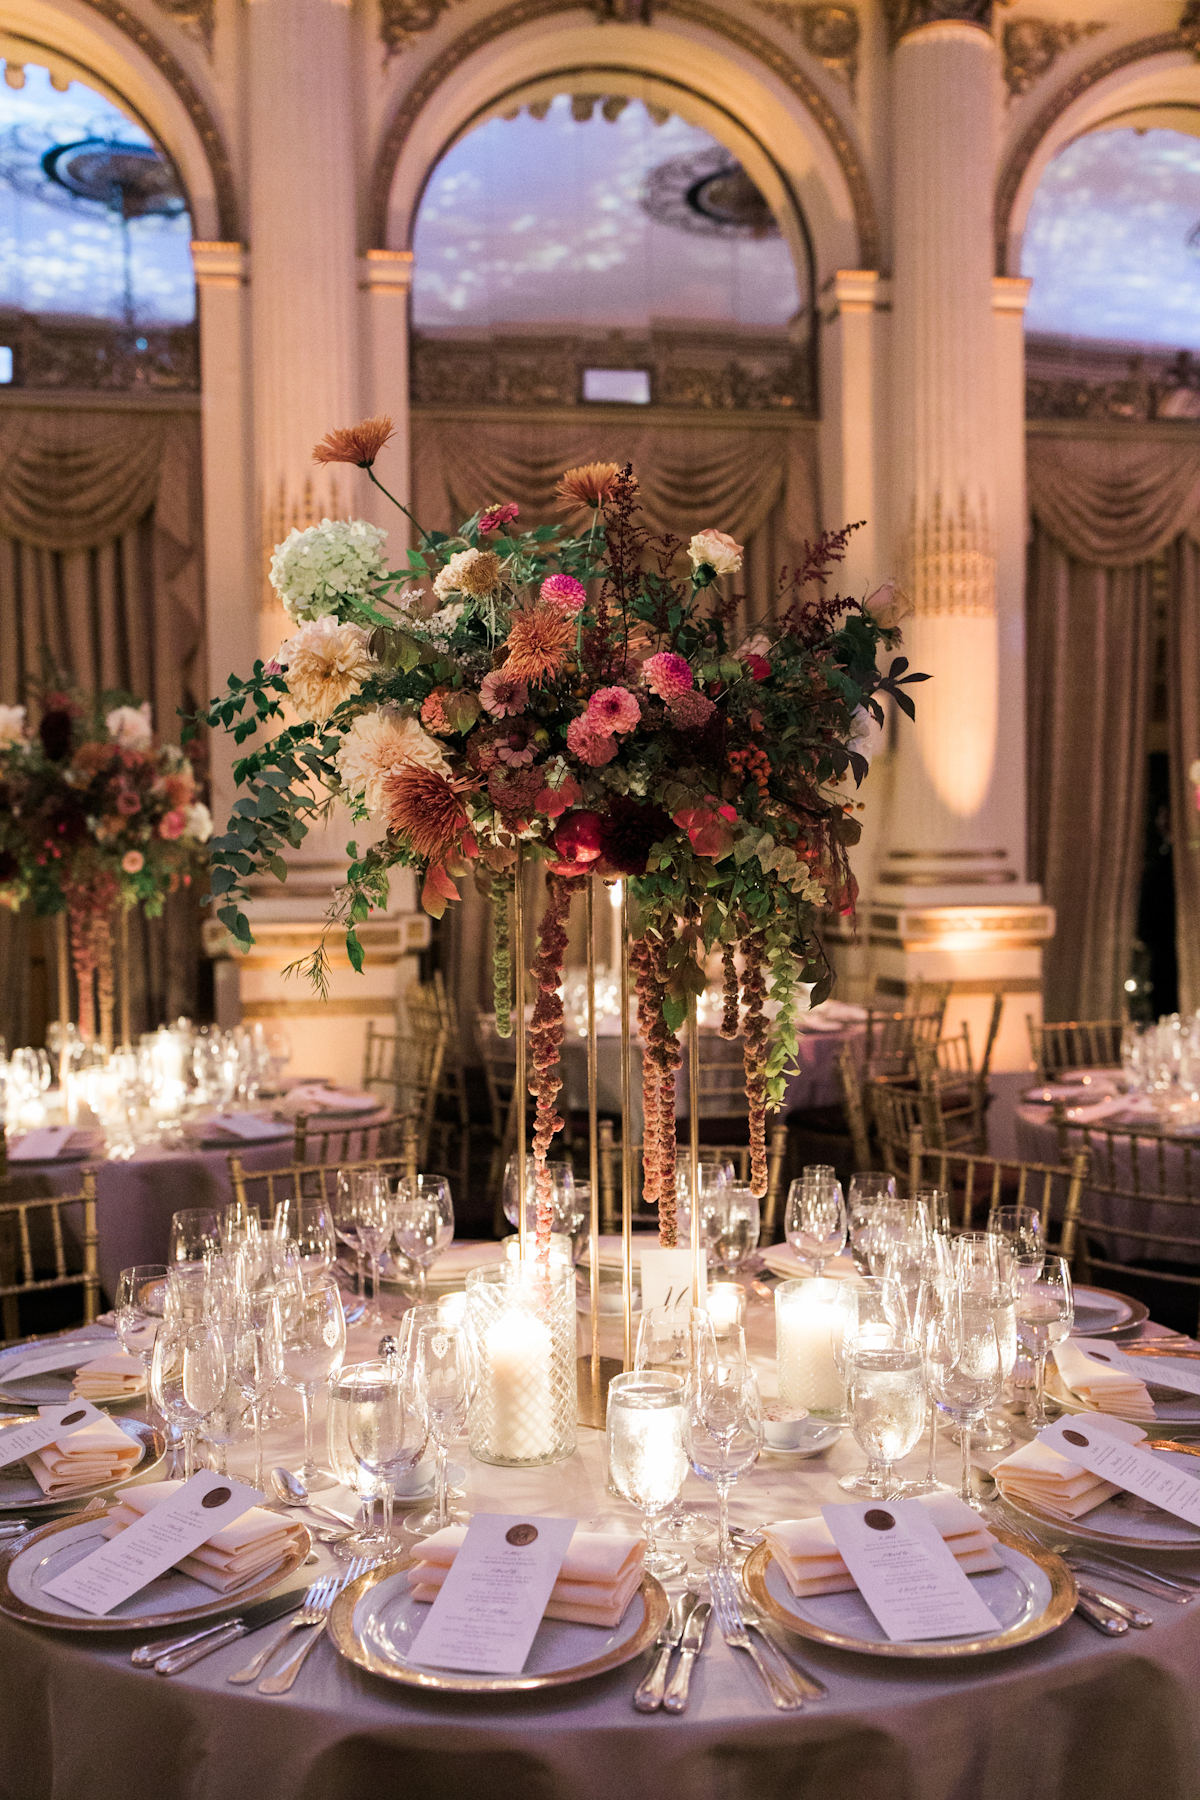 Plaza wedding tablescape with flowers, candles and chargers